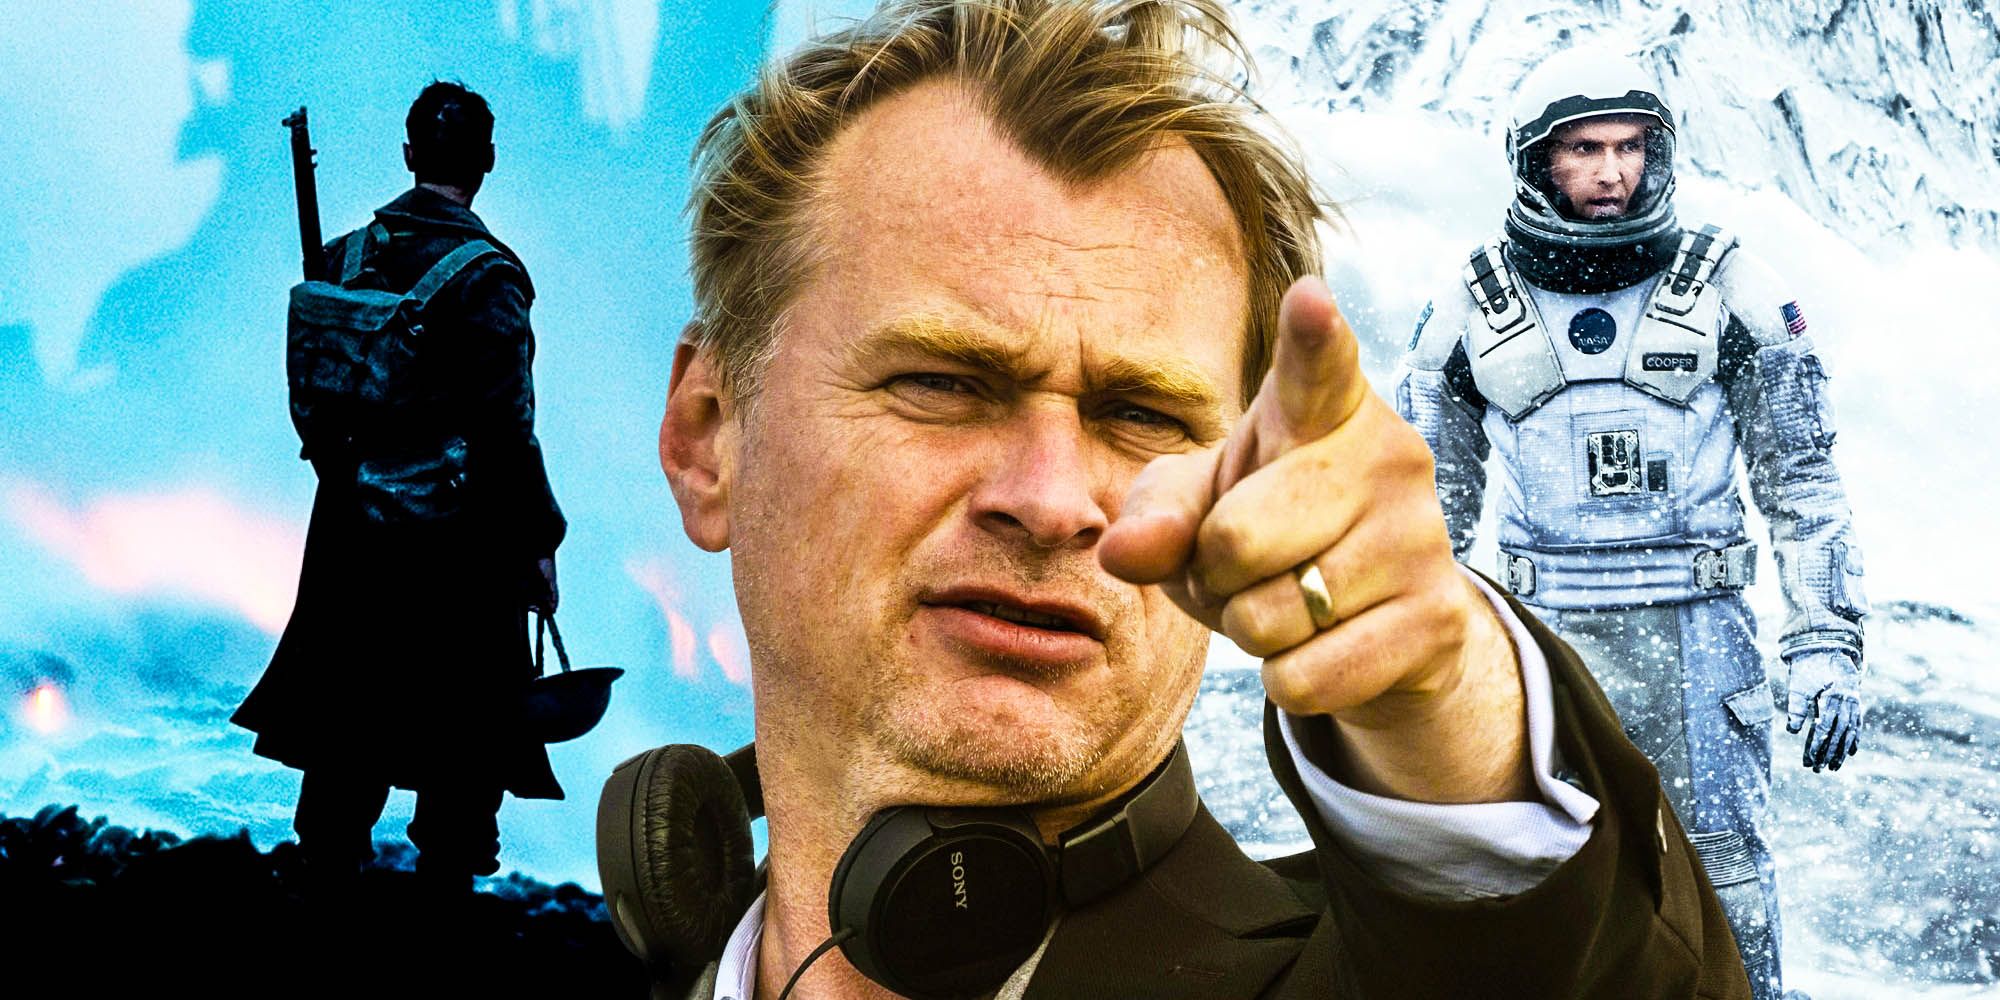 Nolan’s Next Movie Sets Him Up To Repeat Spielberg’s Career Pattern